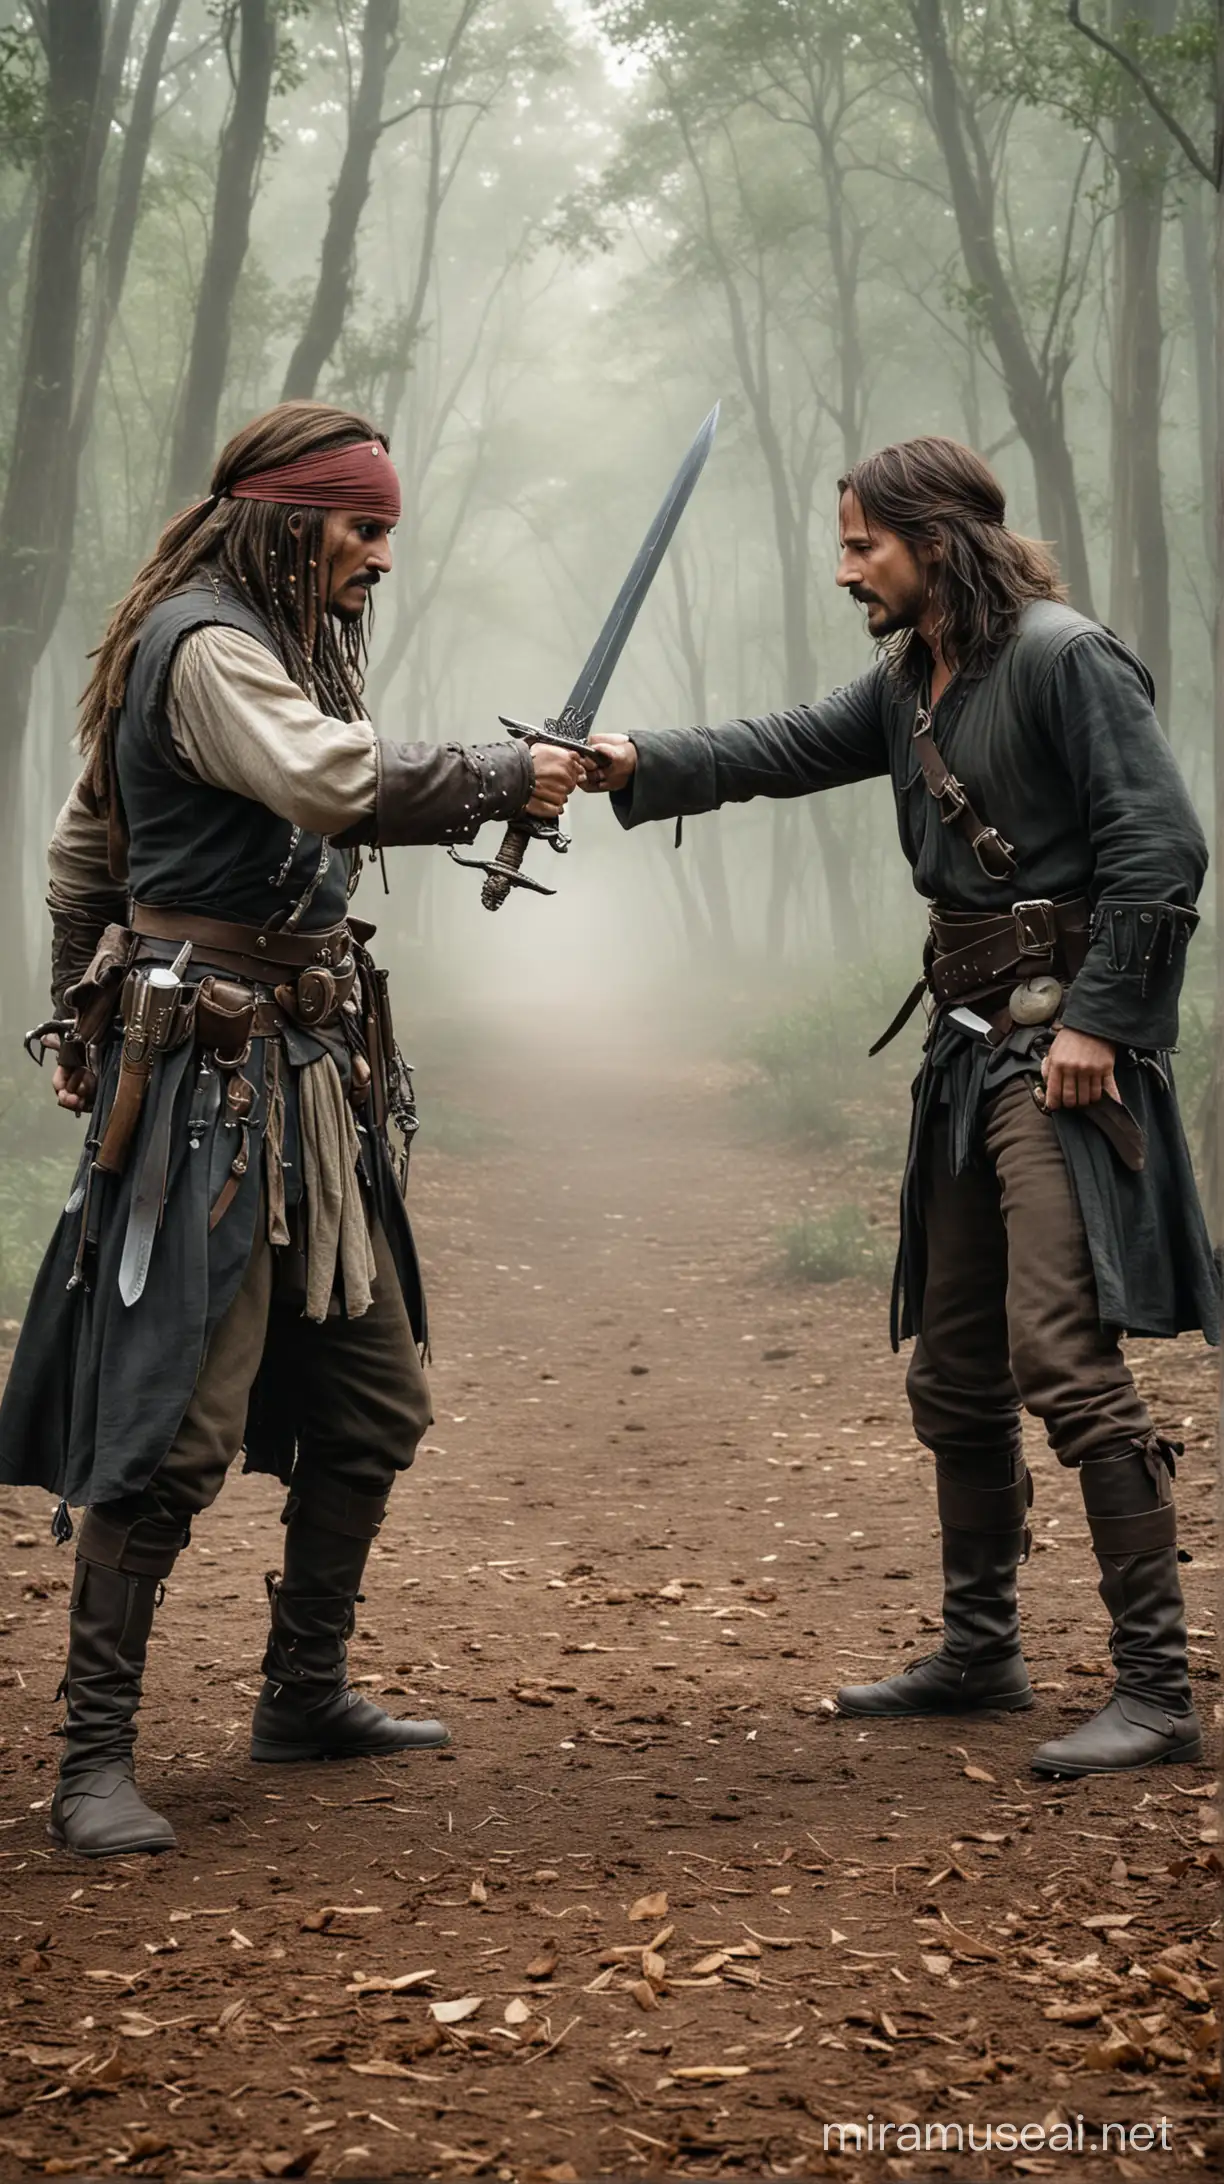 Jack Sparrow and Aragorn are having a sword duel